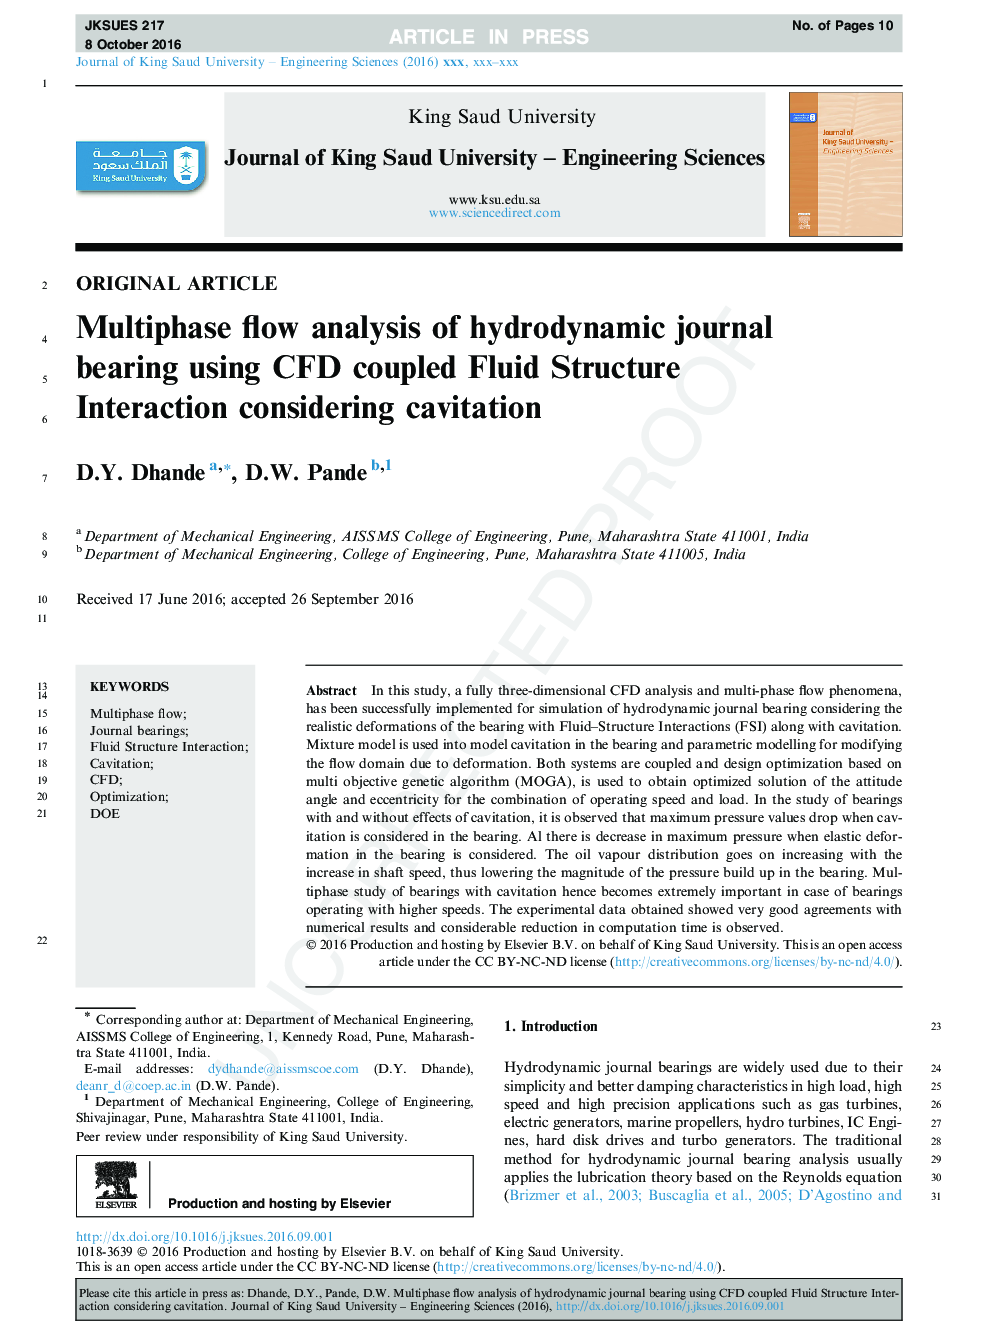 Multiphase flow analysis of hydrodynamic journal bearing using CFD coupled Fluid Structure Interaction considering cavitation